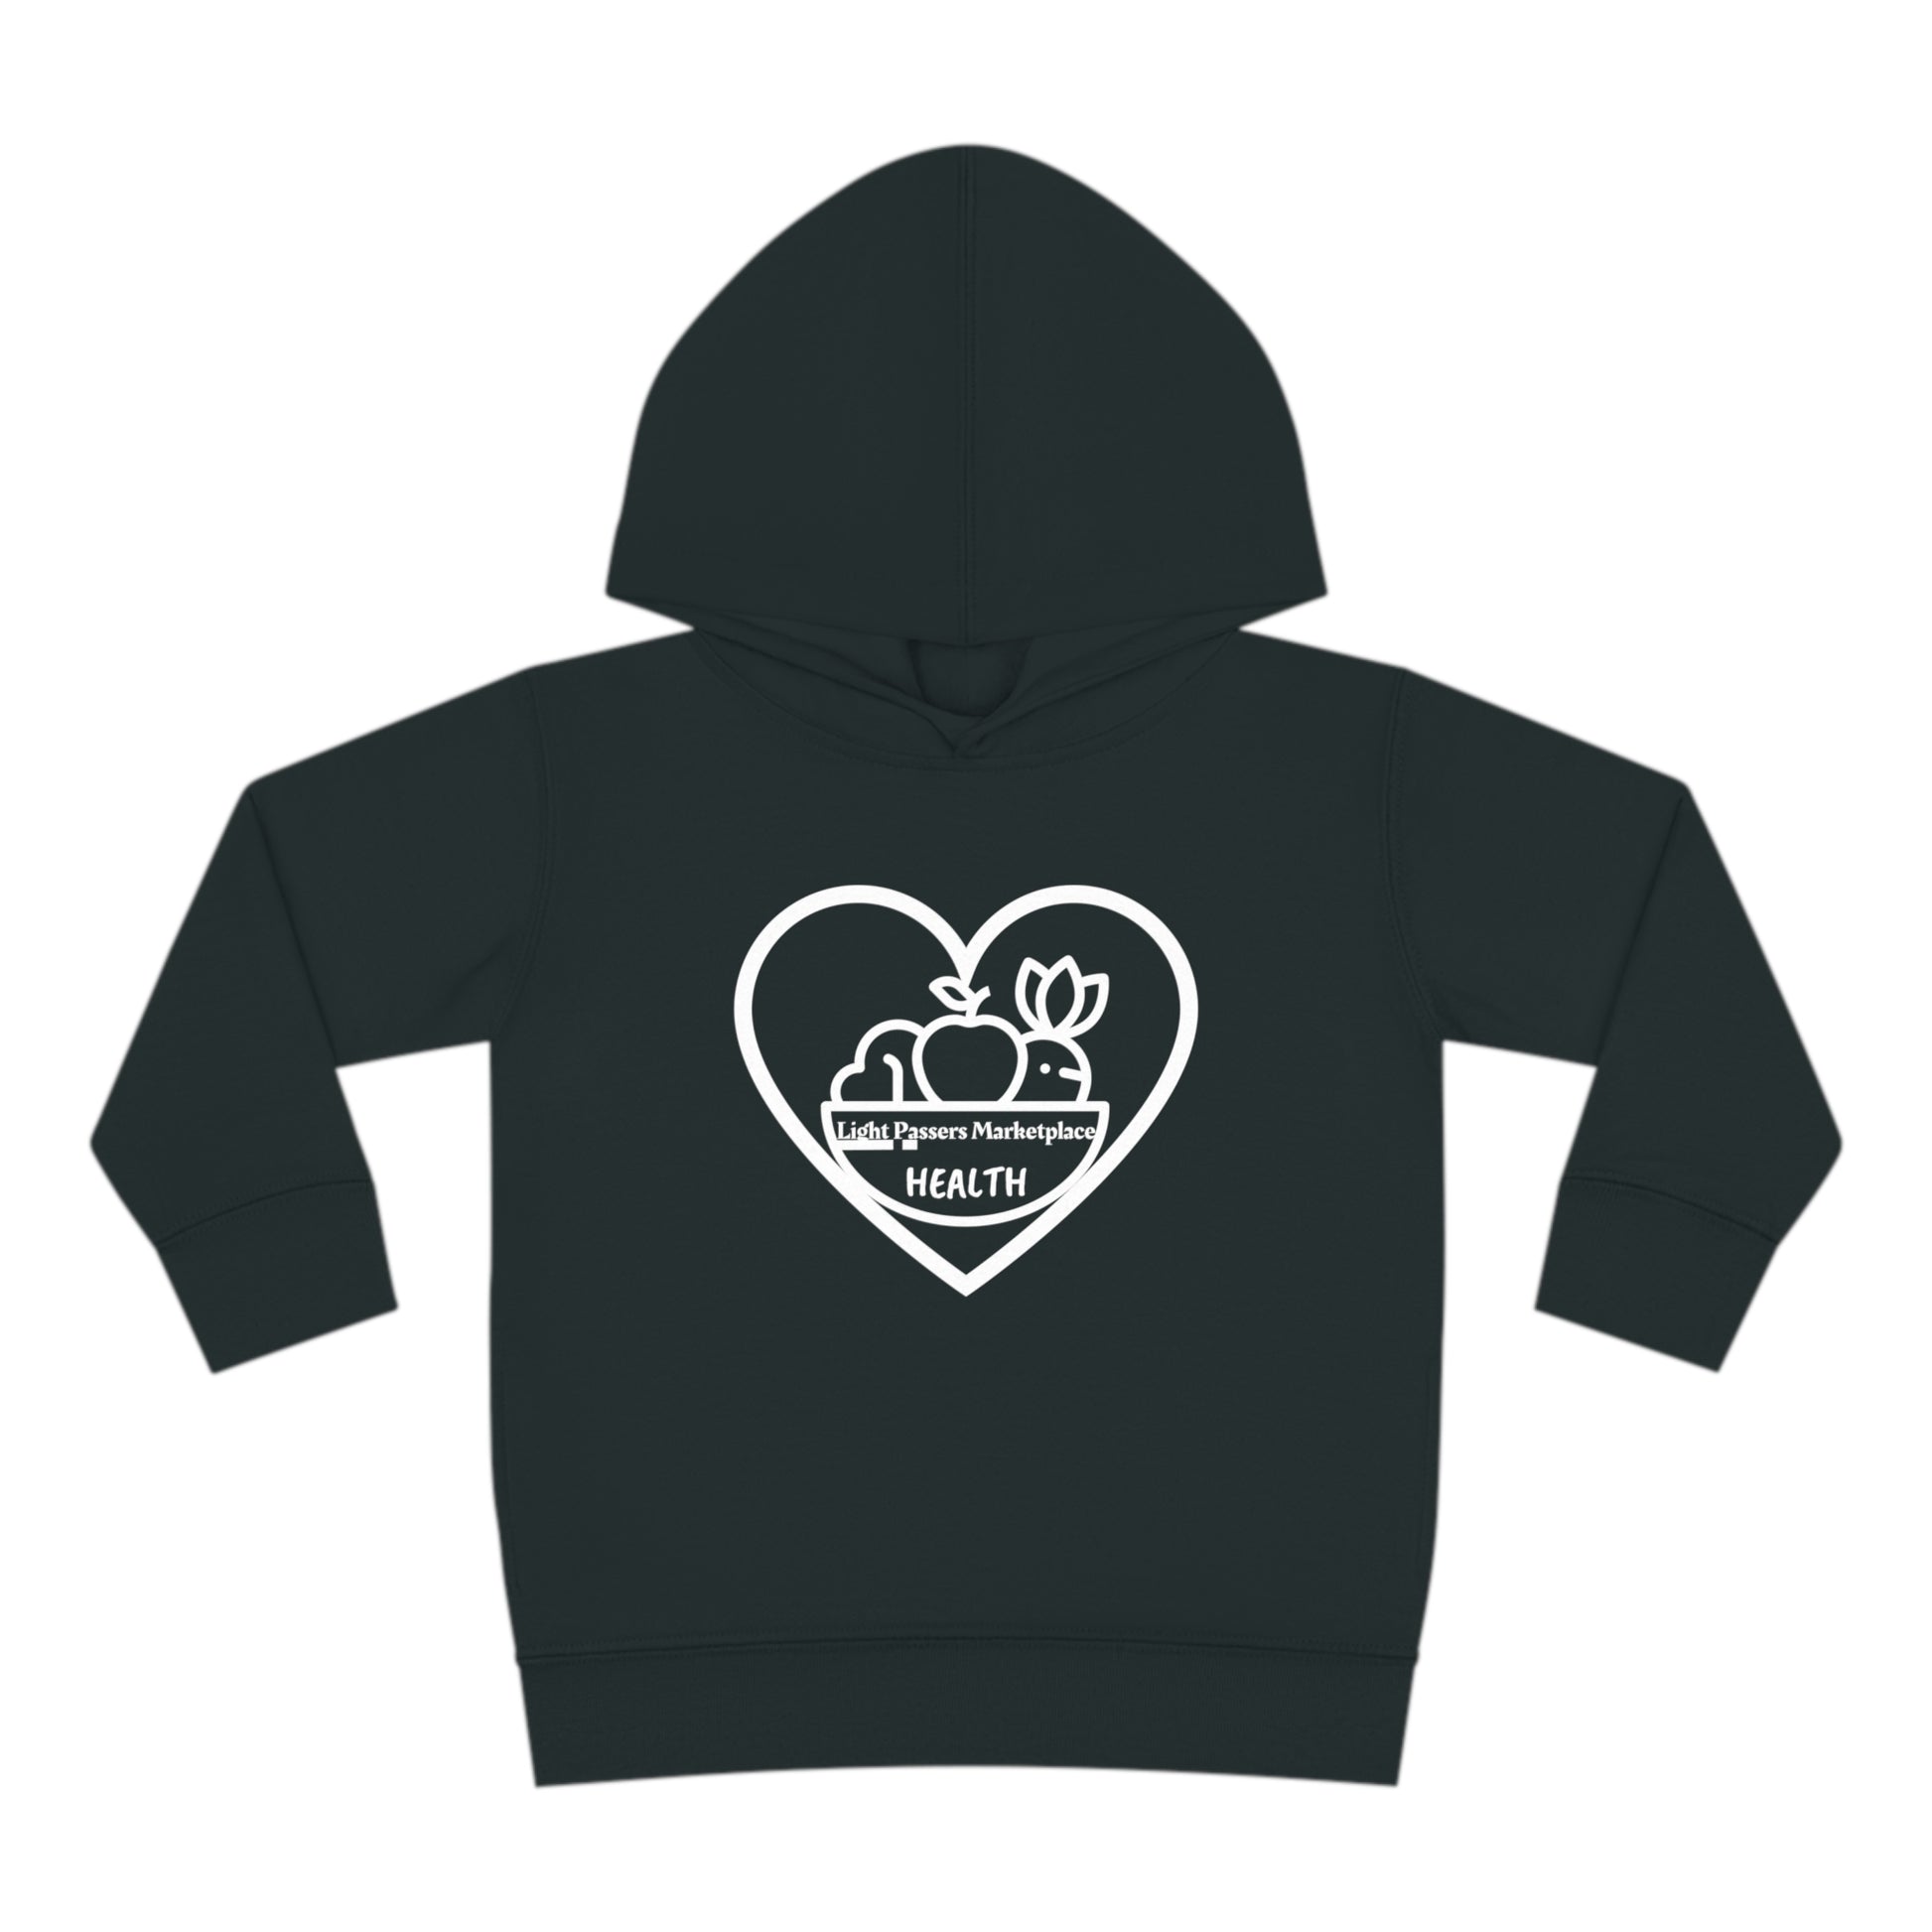 Toddler hoodie with heart, apples, and fruit logo design, featuring side-seam pockets and double-needle hem hood for durability and comfort. Made of 60% cotton, 40% polyester blend.